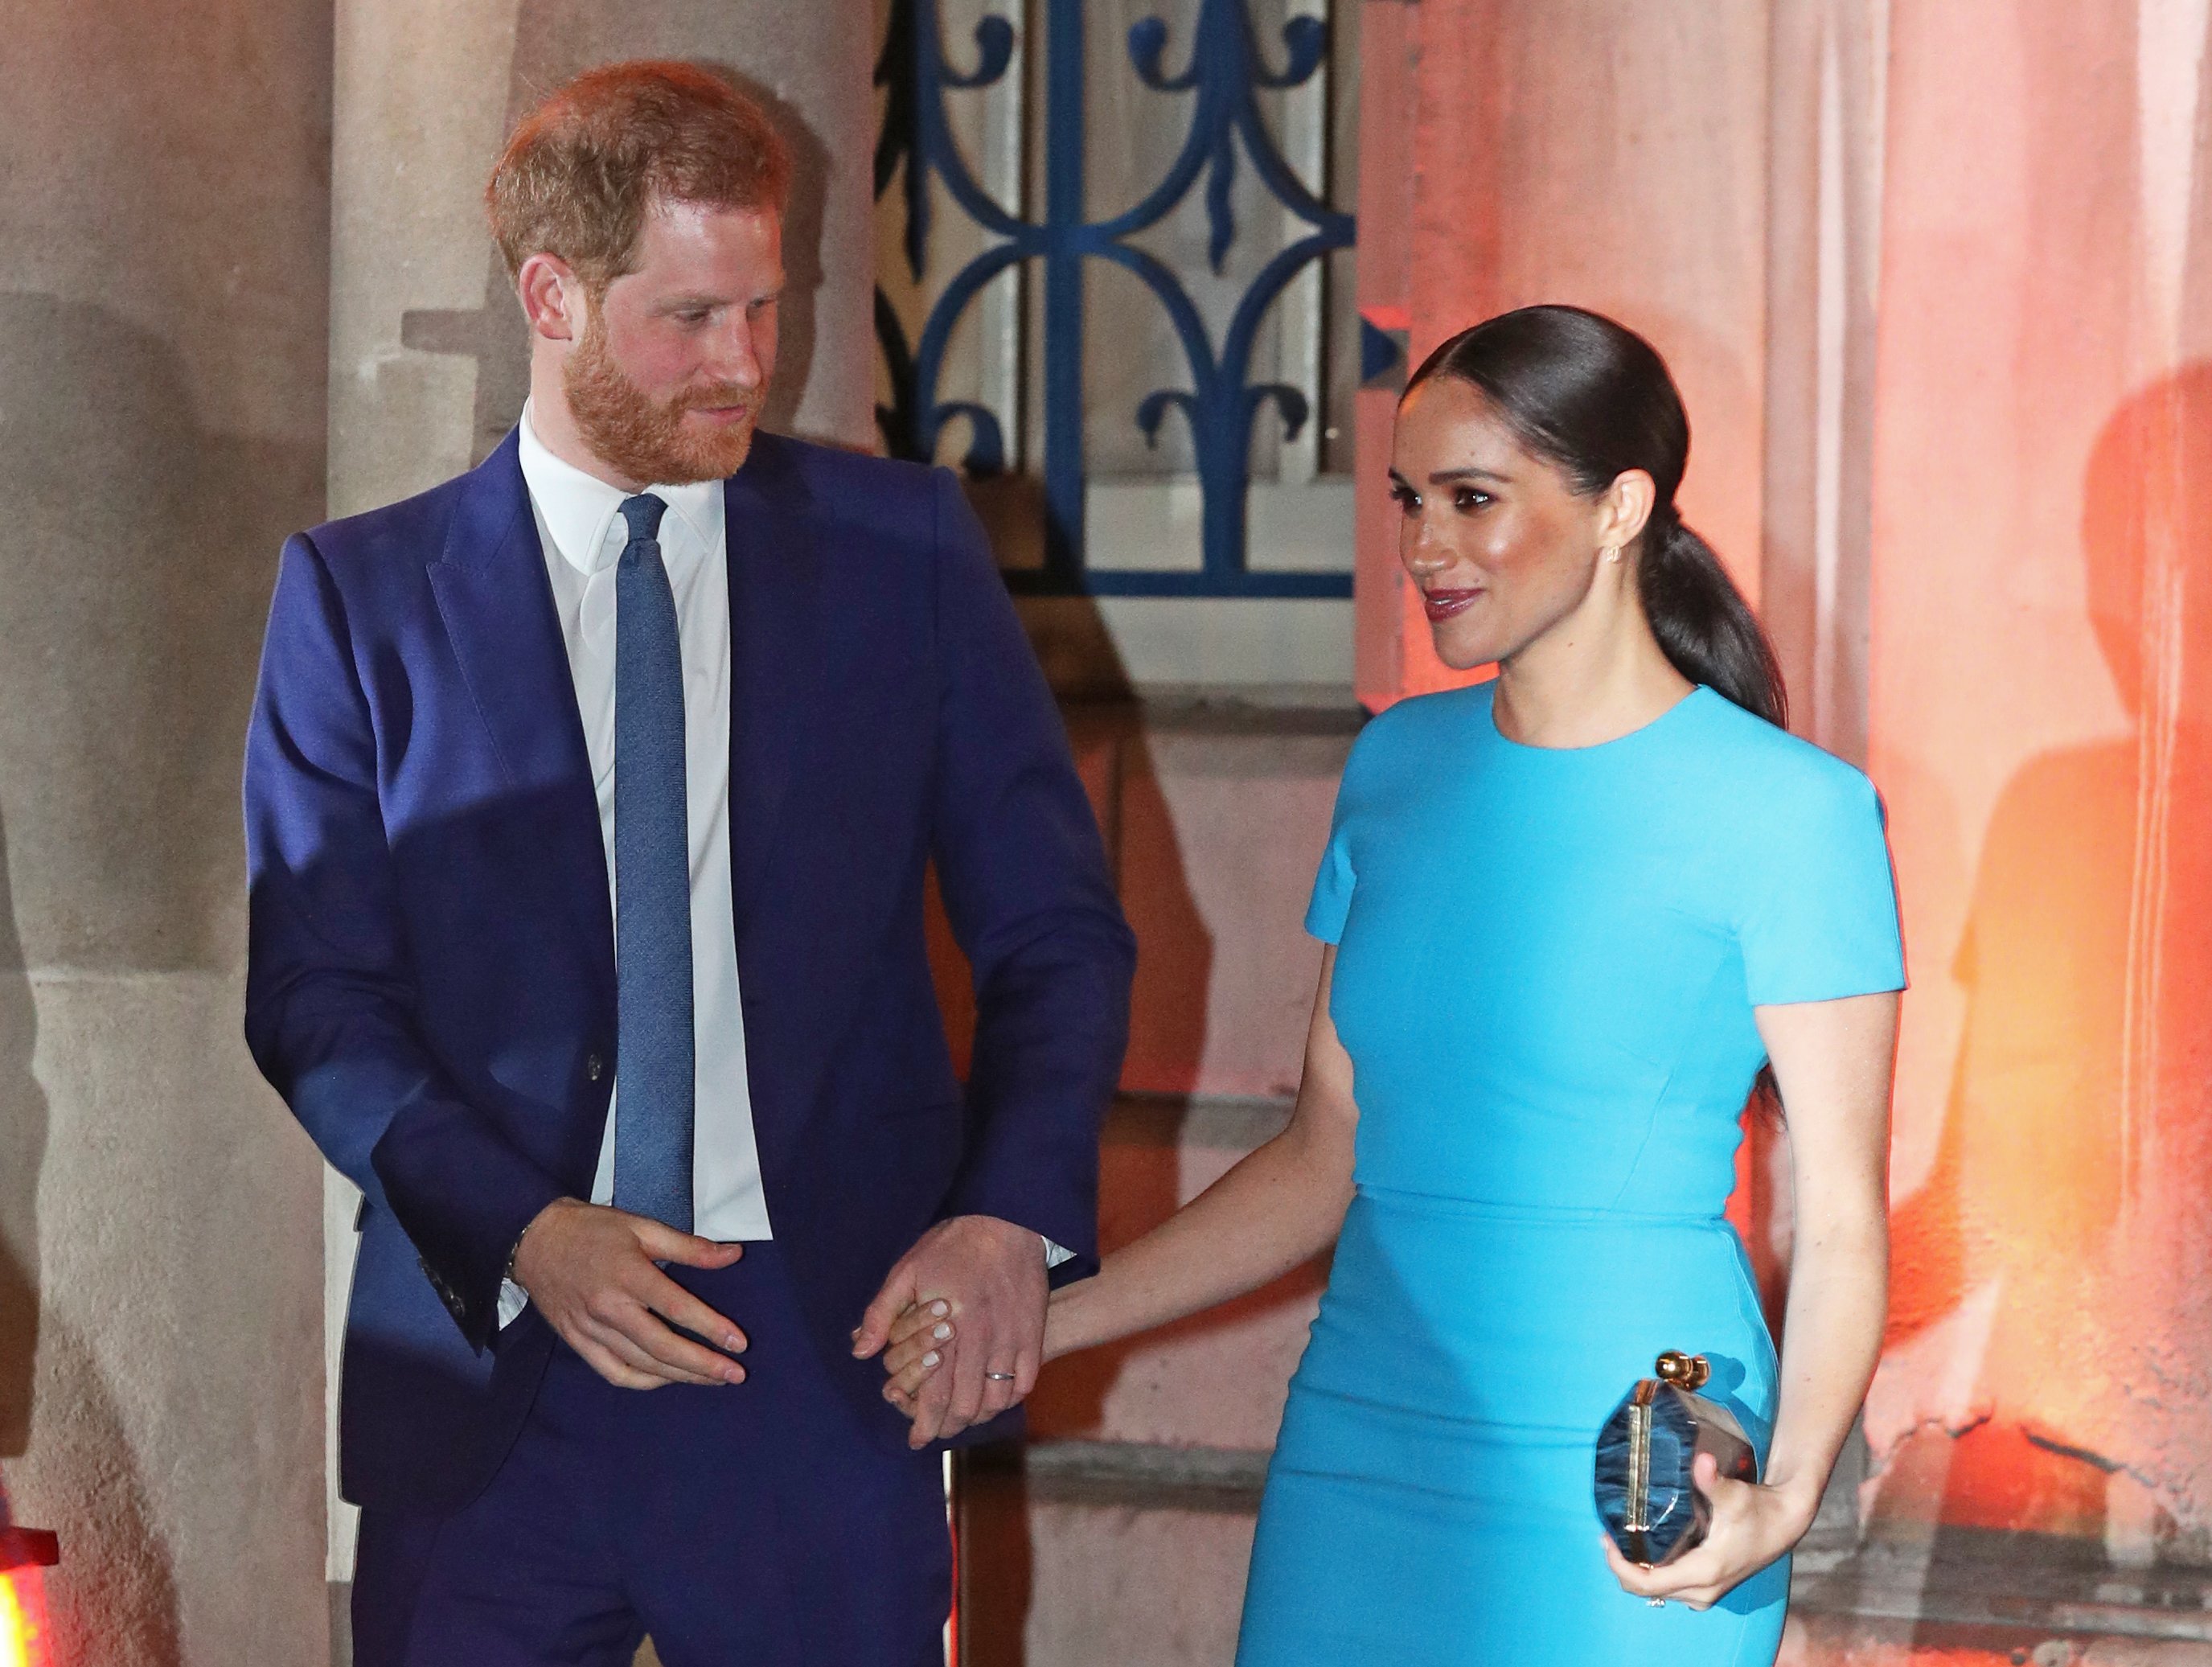 The Duke and Duchess of Sussex leave Mansion House in London after attending the Endeavour Fund Awards. | Source: Getty Images